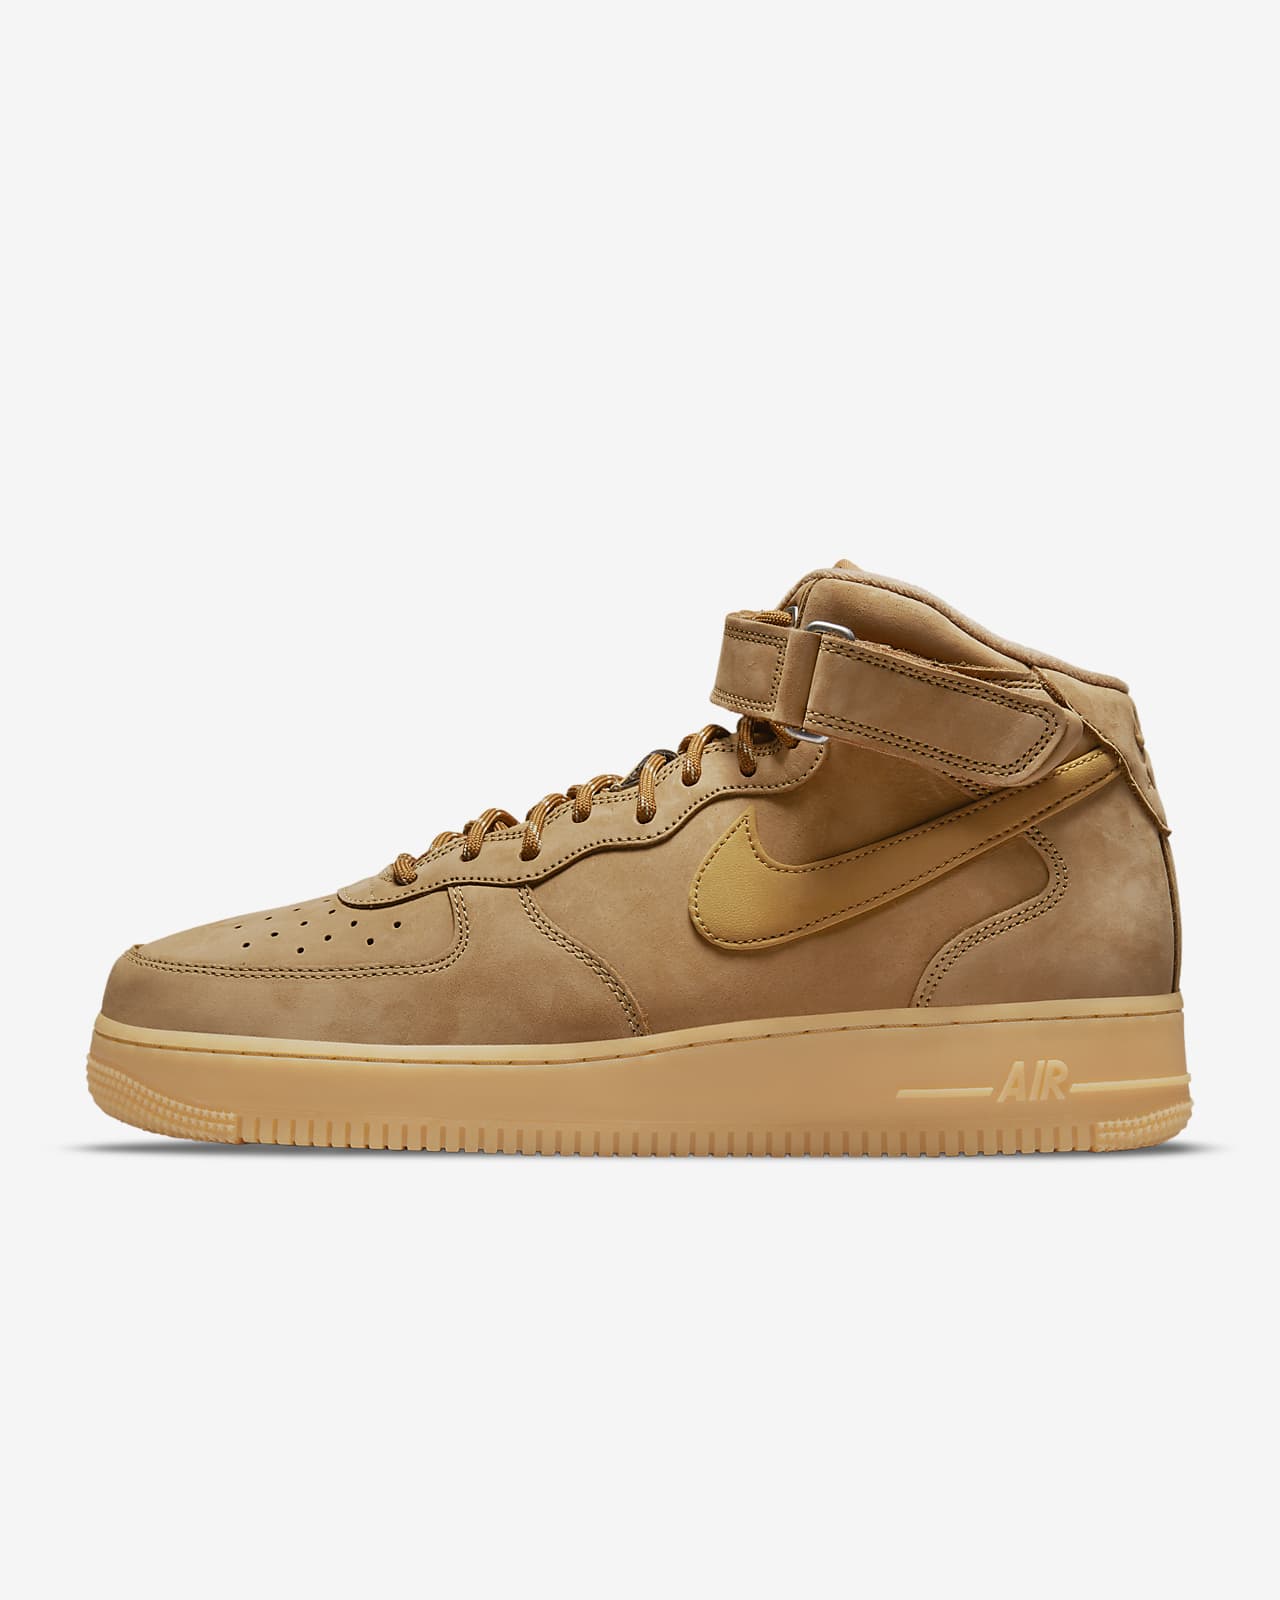 air force 1 mid 07uomo